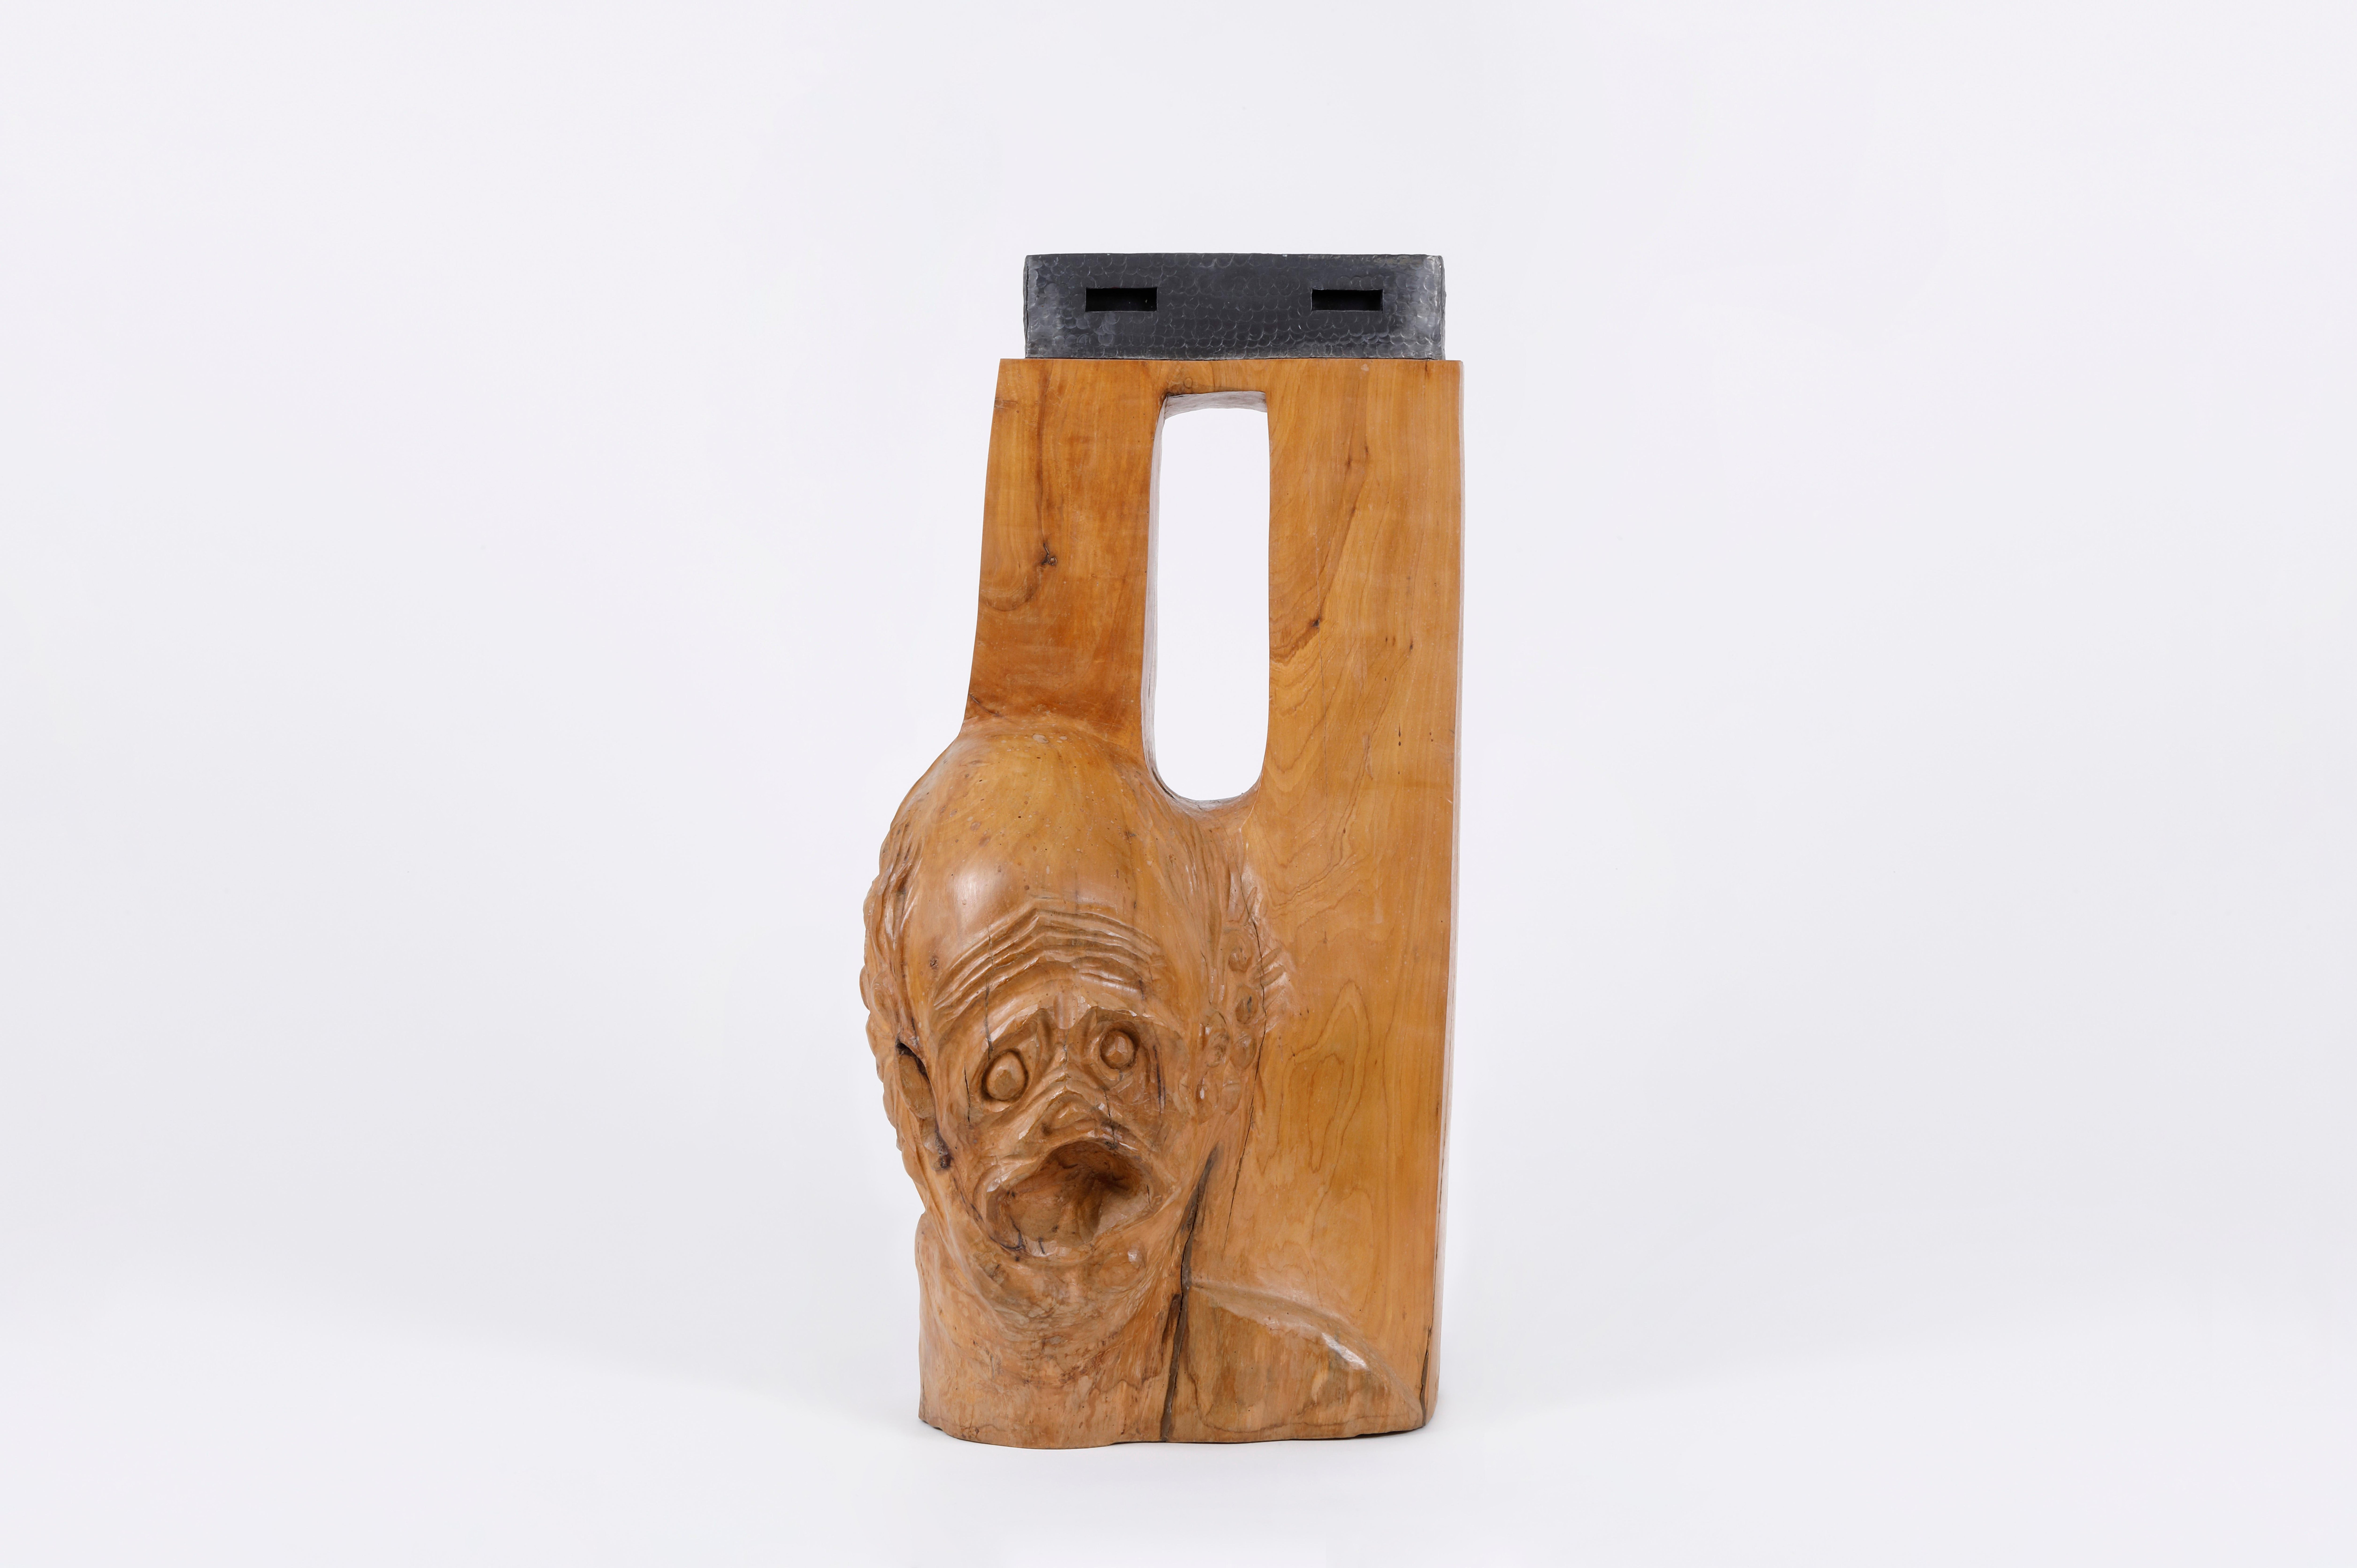 Unusual brutalist hand-carved wooden sculpture, France
Carved on both side with abstract visage